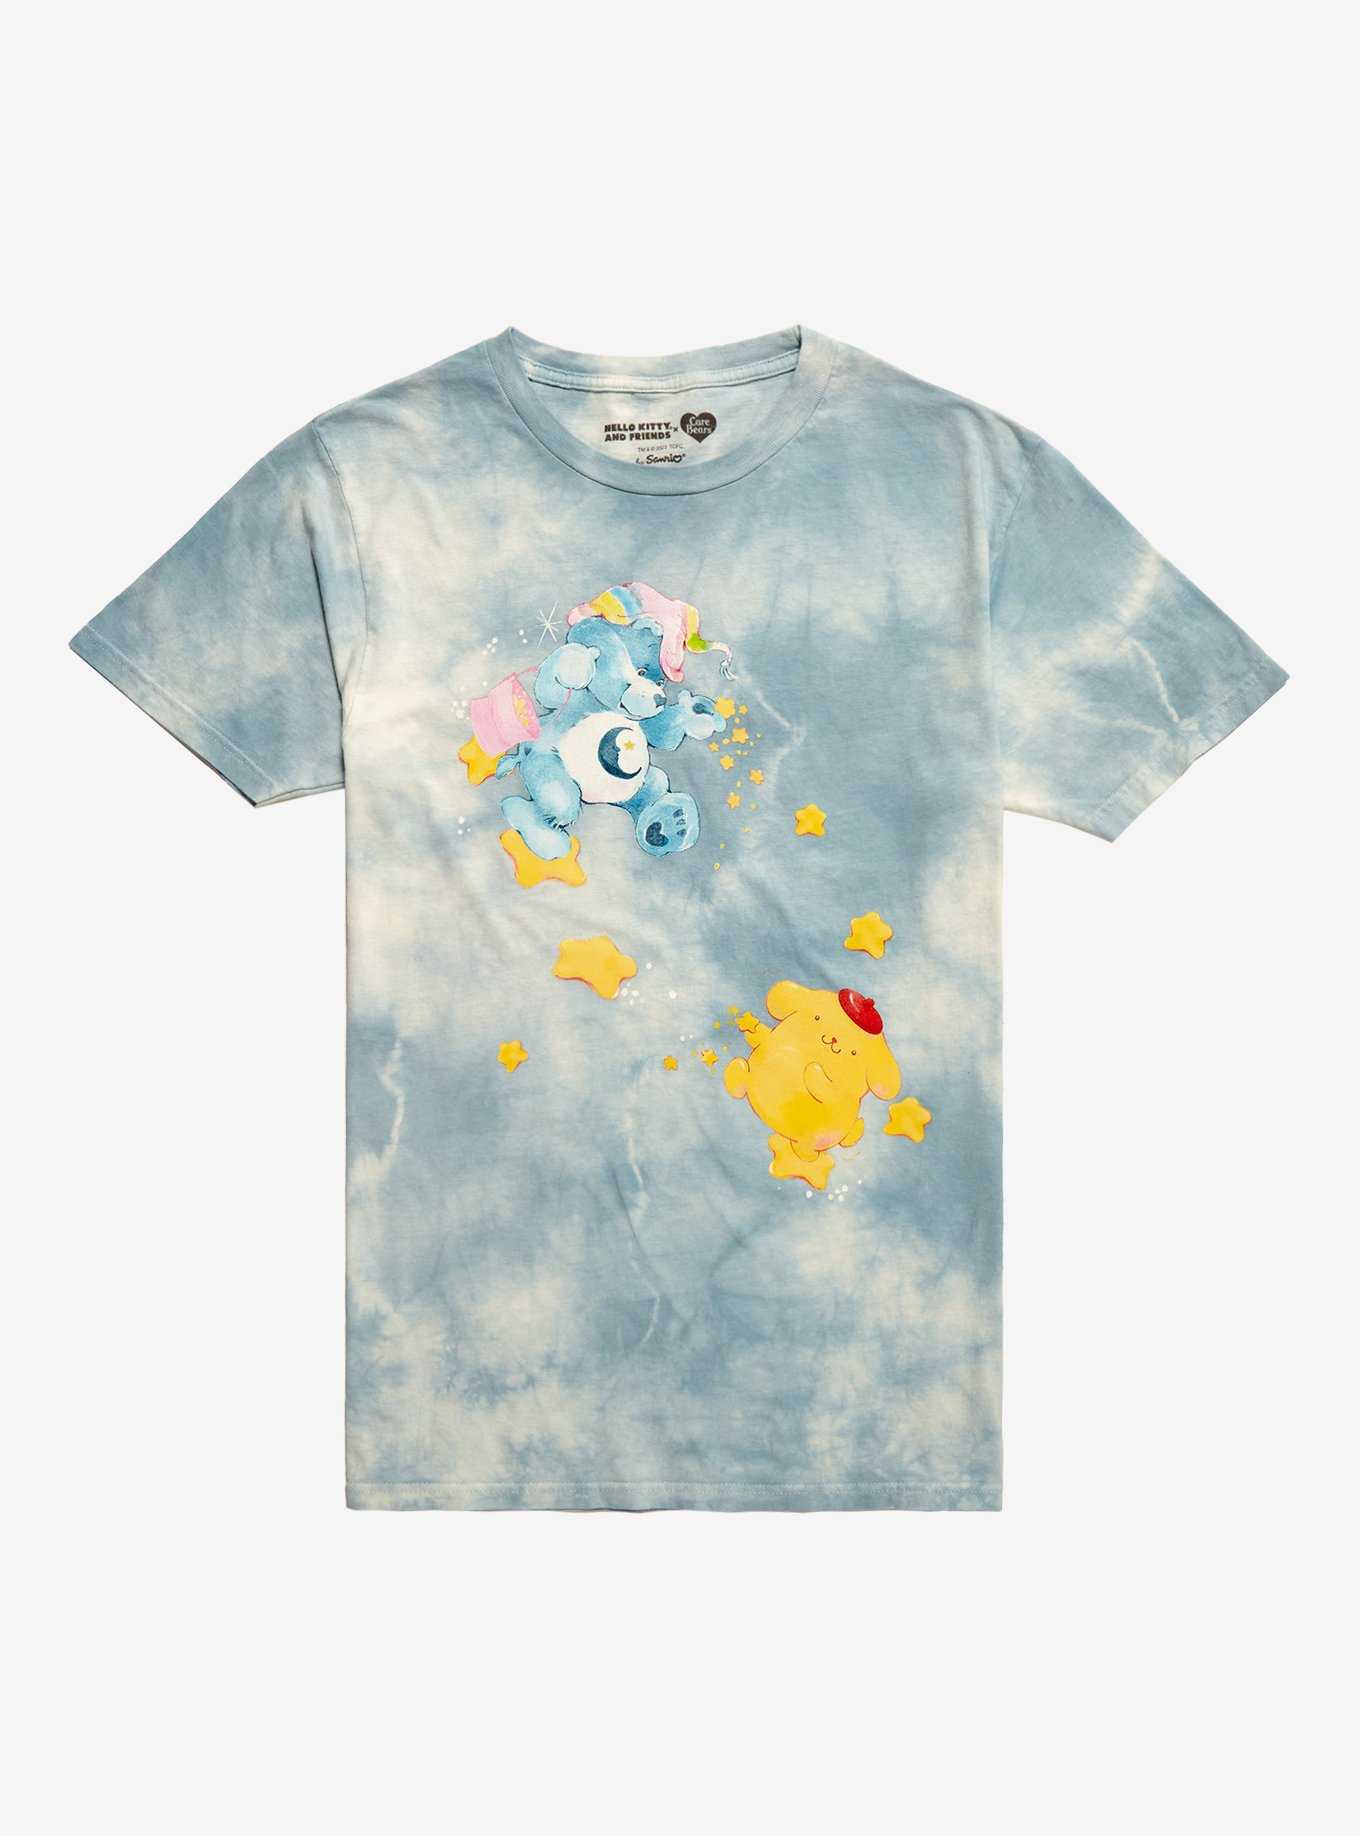 Care Bears X Hello Kitty And Friends Bedtime Bear & Pompompurin Boyfriend Fit Girls T-Shirt, , hi-res